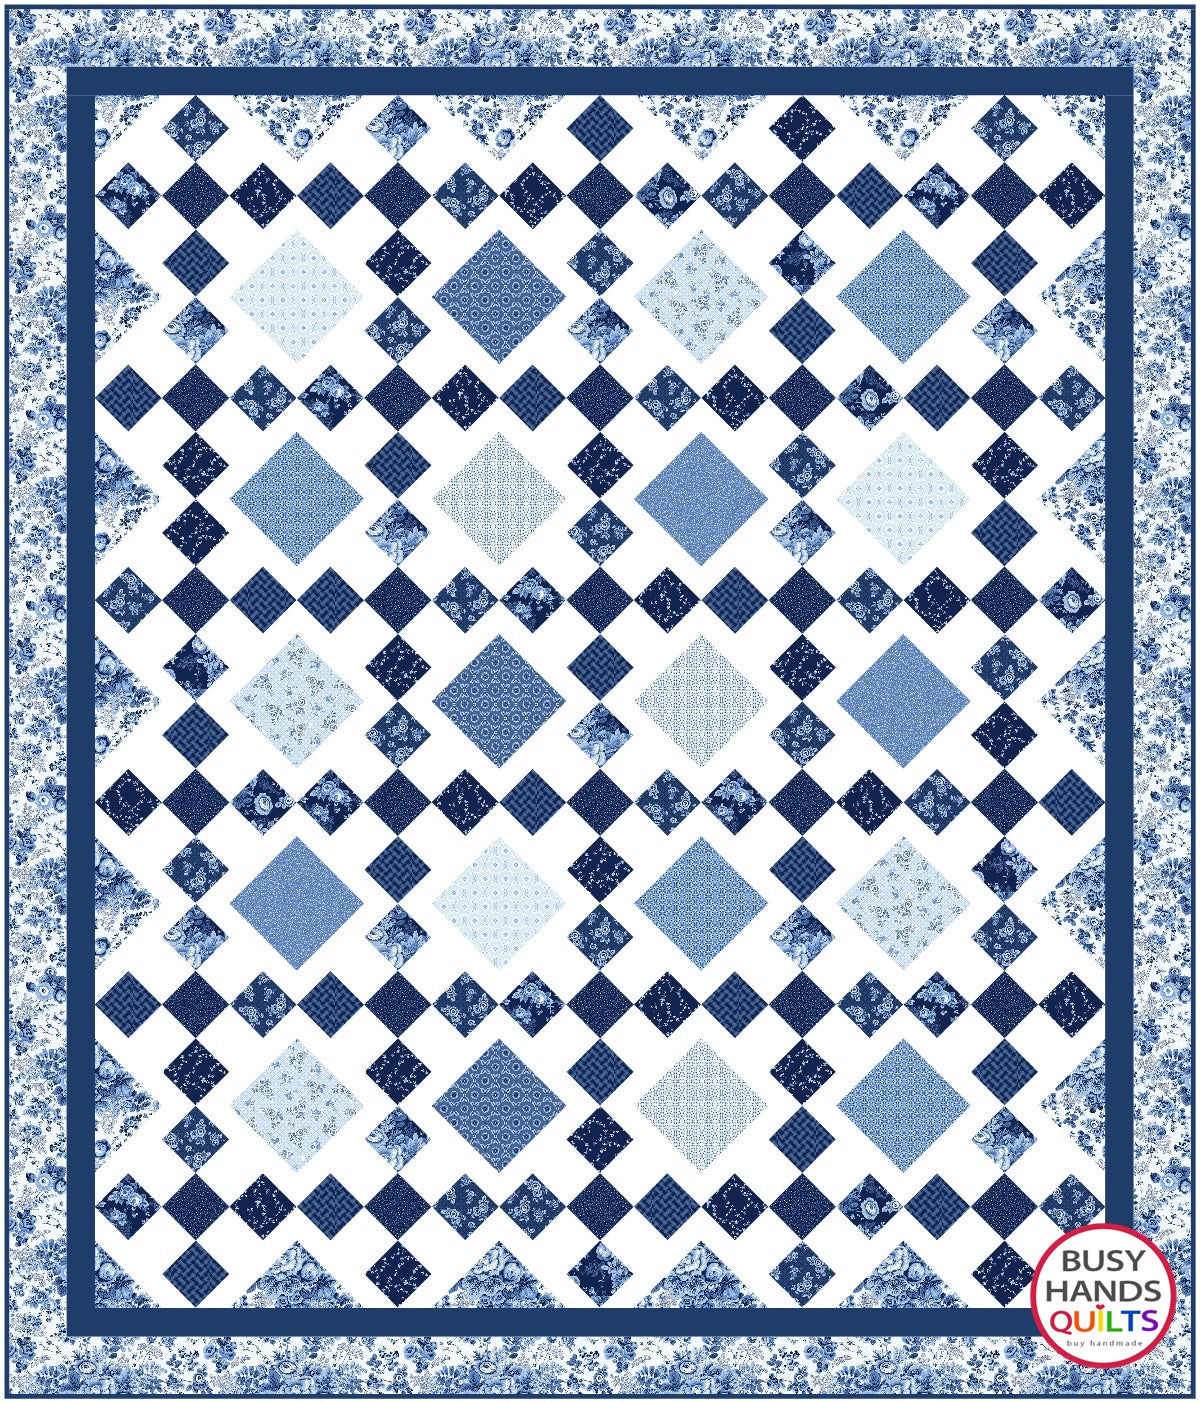 Granny's Square Patch Quilt Pattern PDF DOWNLOAD Busy Hands Quilts $12.99